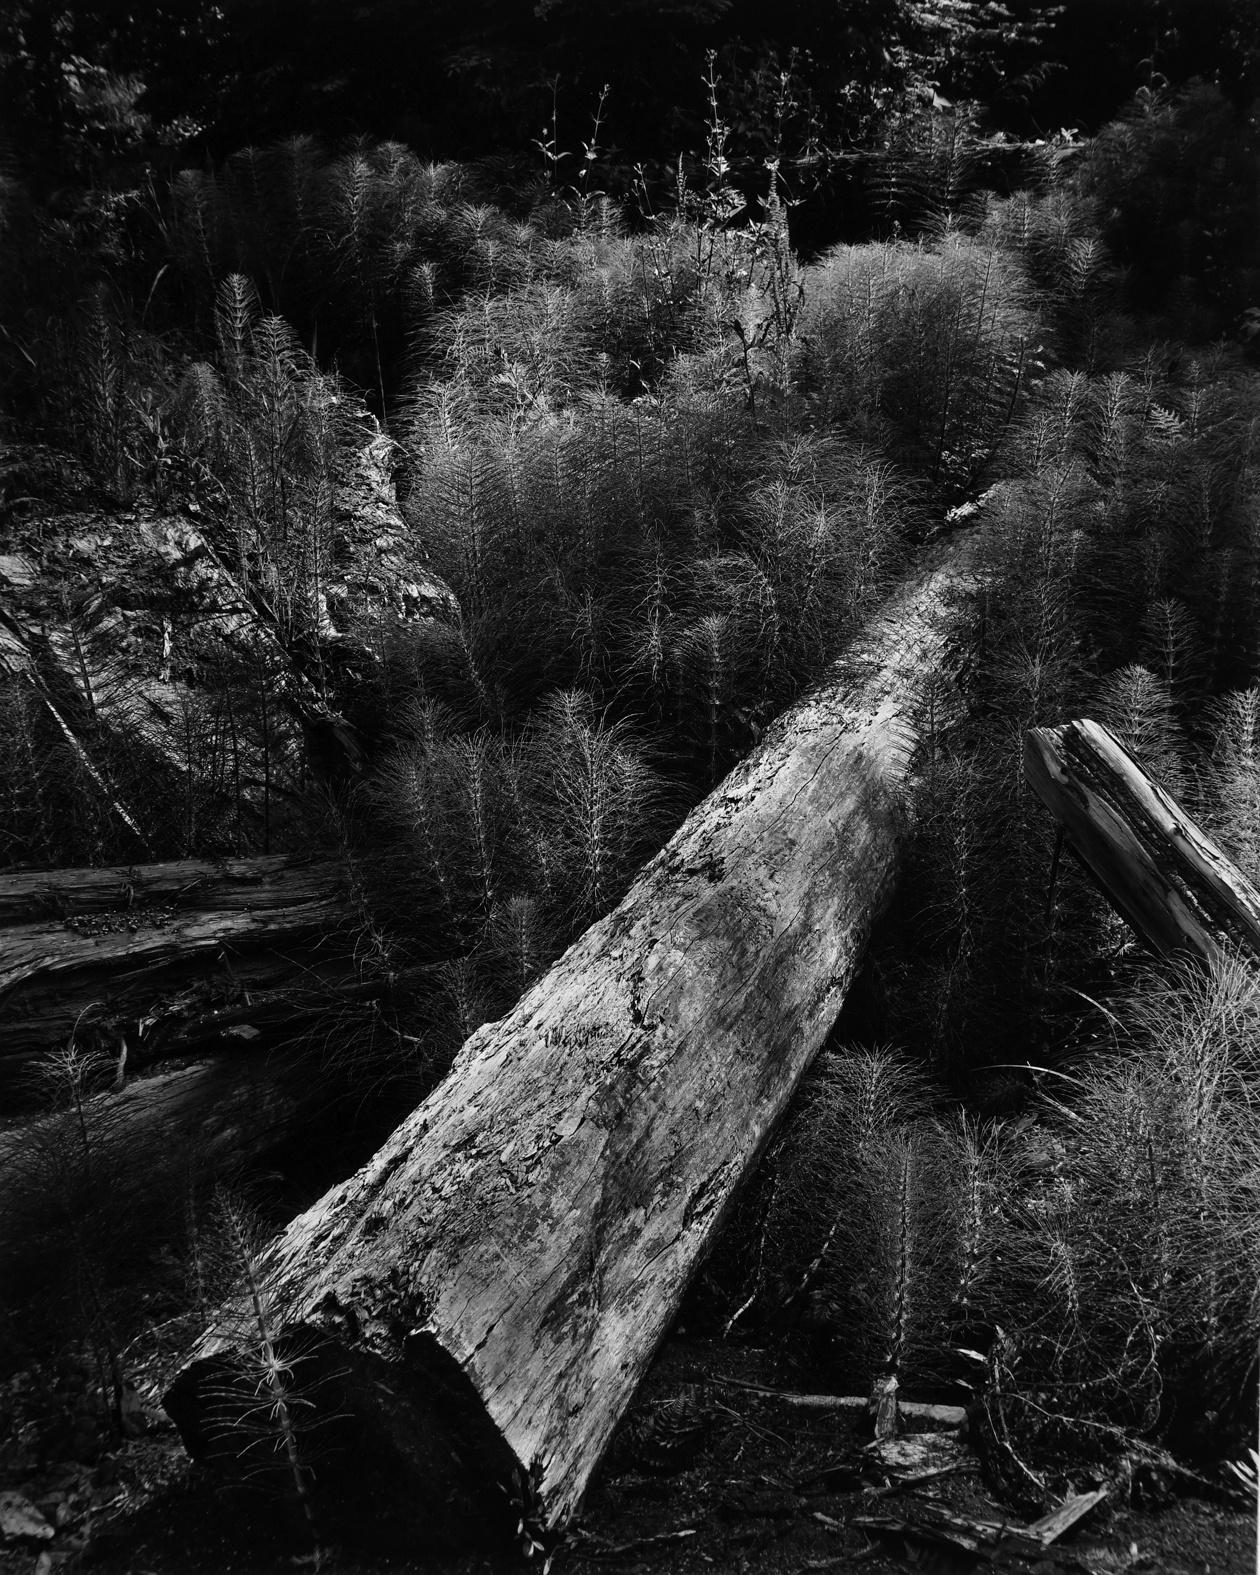 Wynn Bullock Black and White Photograph - Horsetails and Log, 1957 (Printed before 1965)